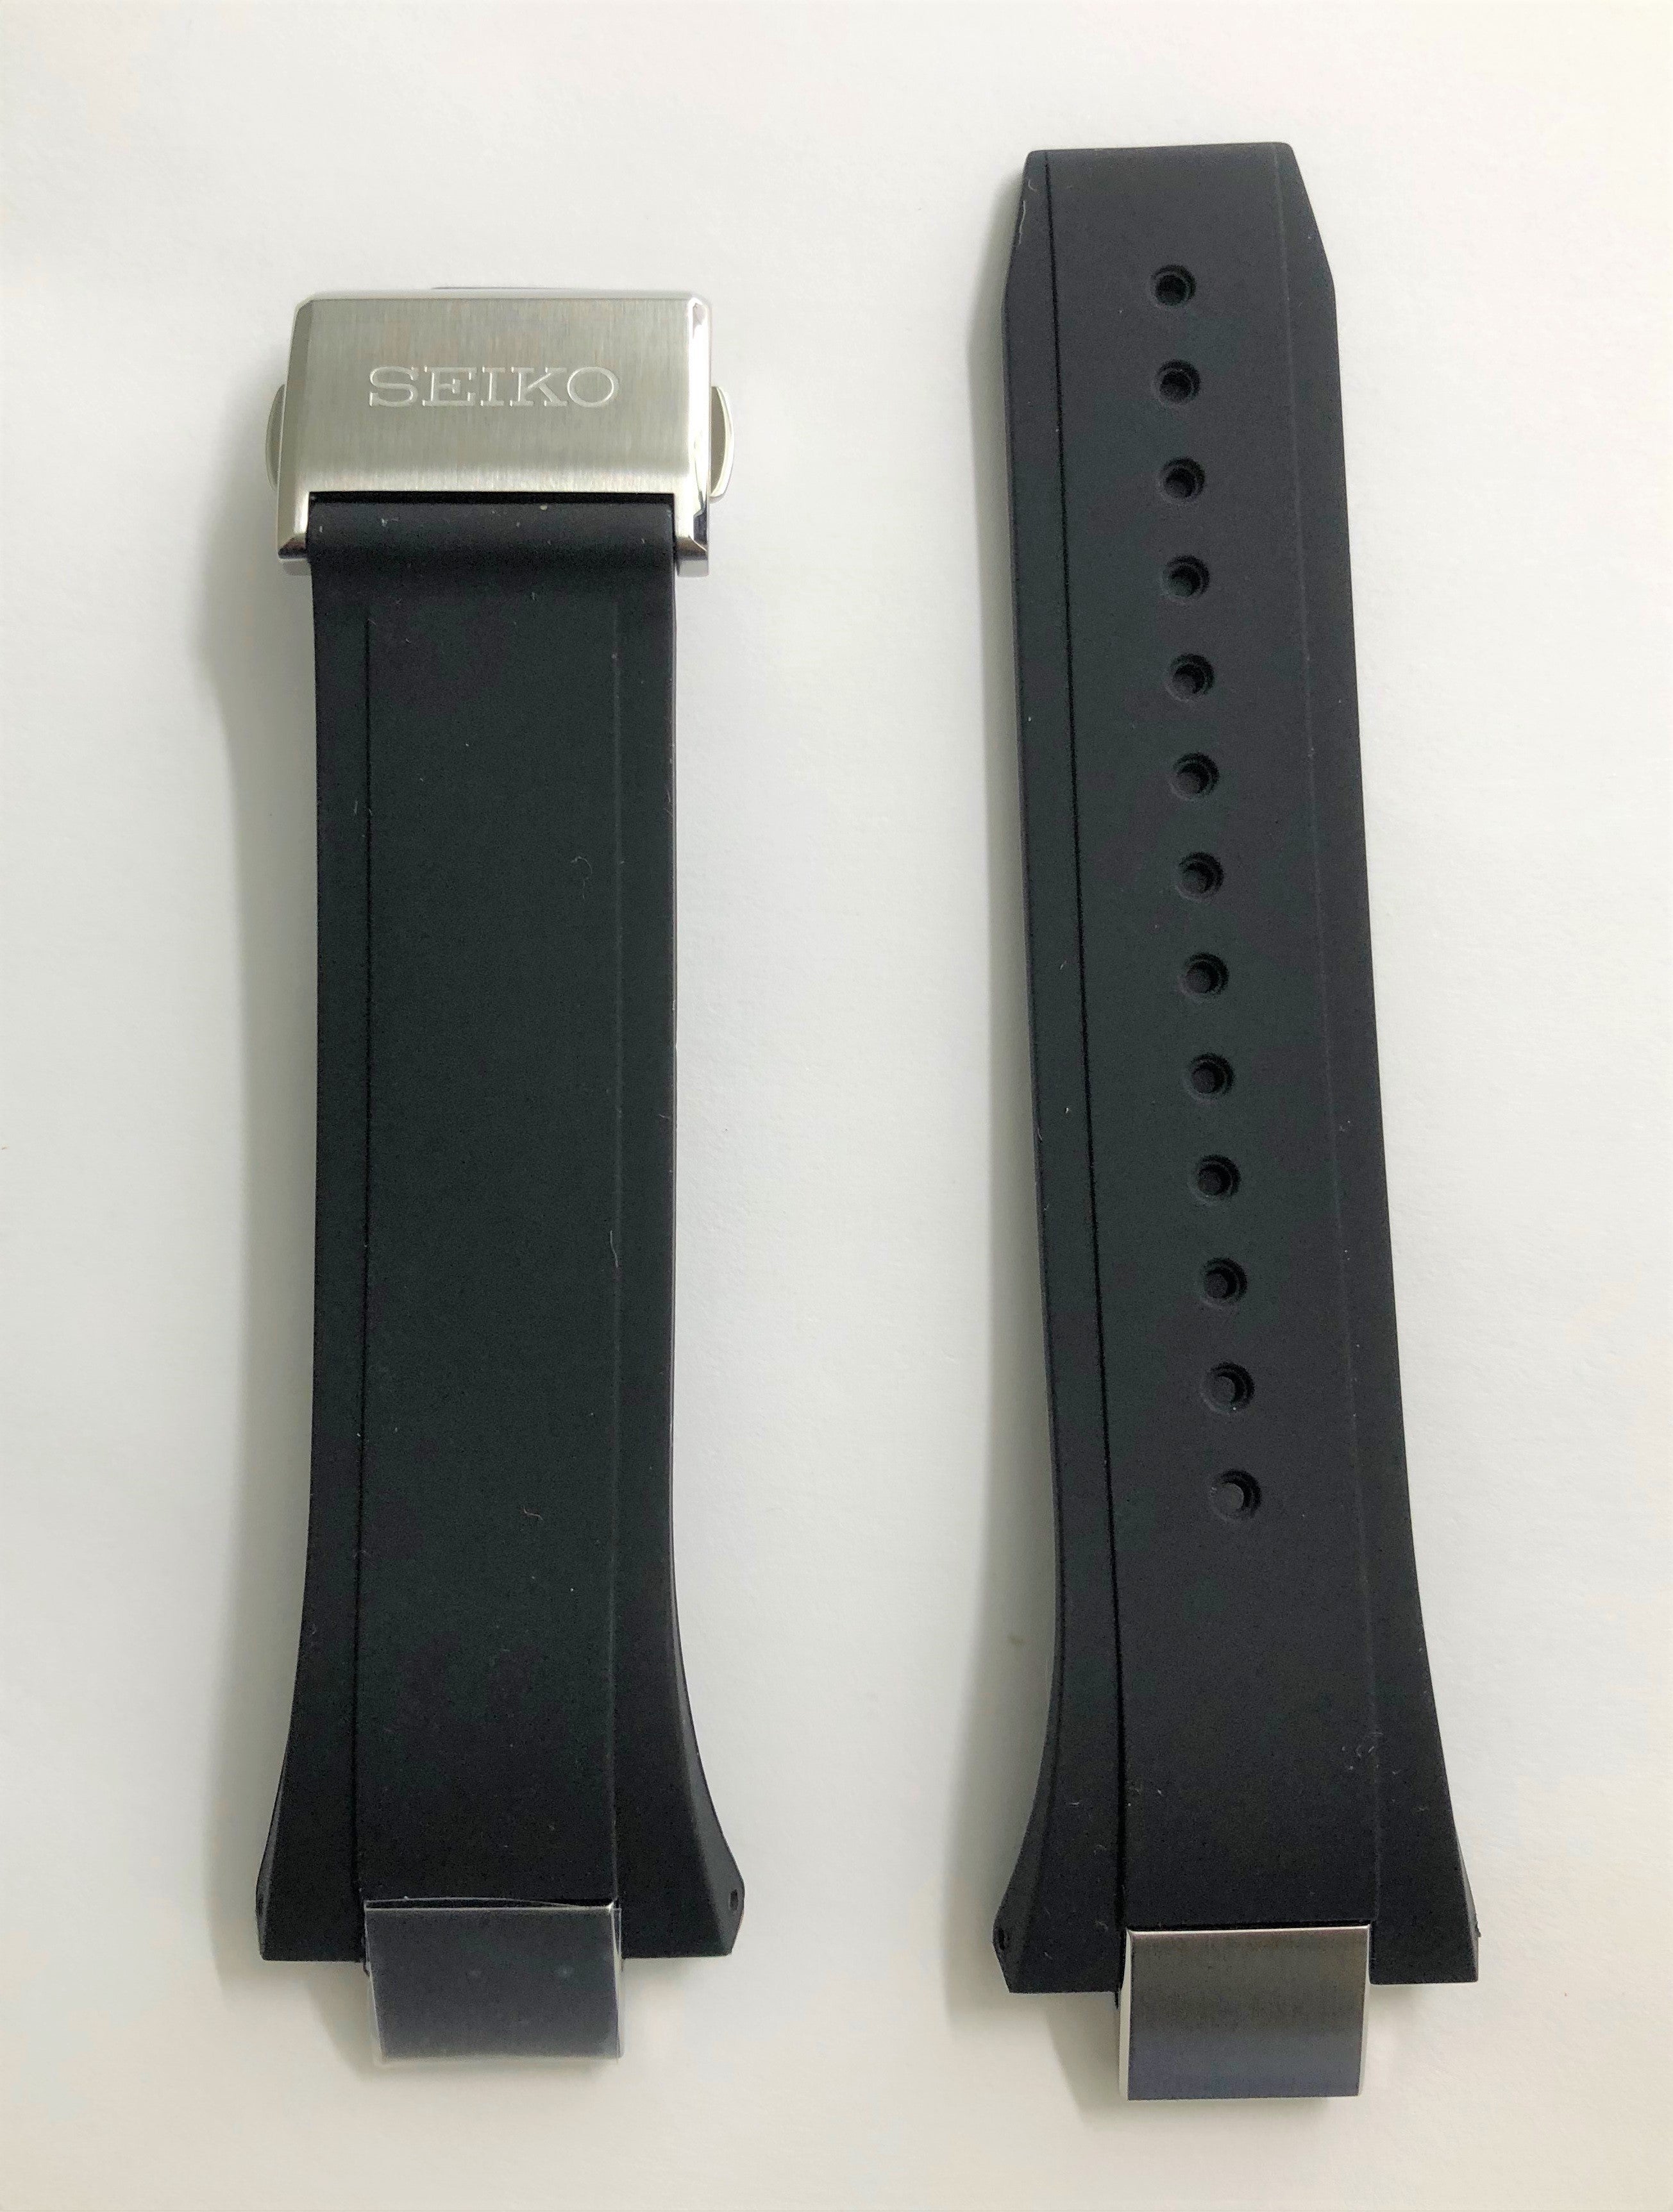 Seiko Astron SSE167 / SSE167J Black Rubber Watch Band